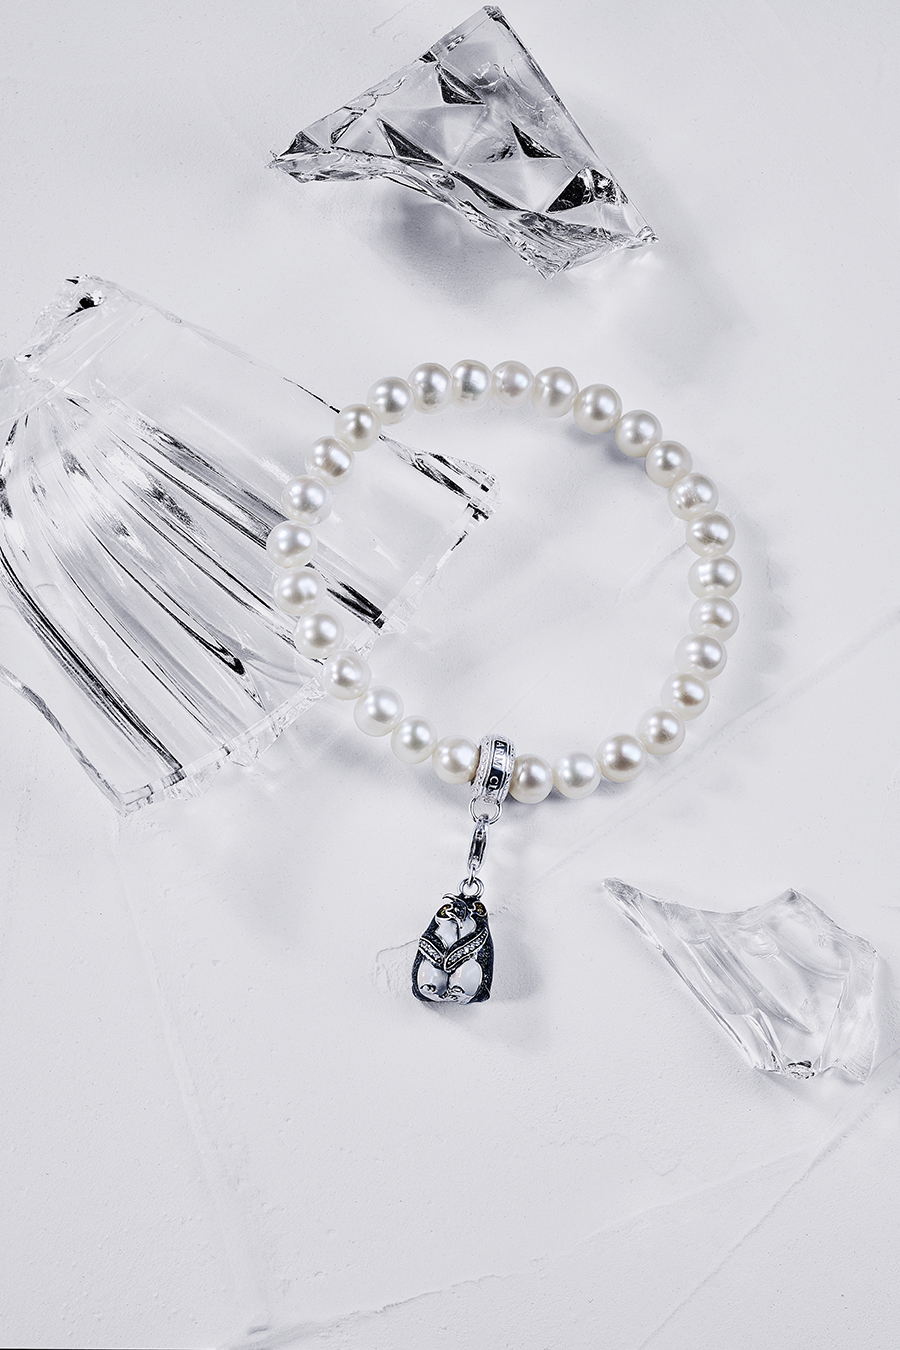 THOMAS SABO_CHARM CLUB_AW22_MODEL AND STILL IMAGERY_2